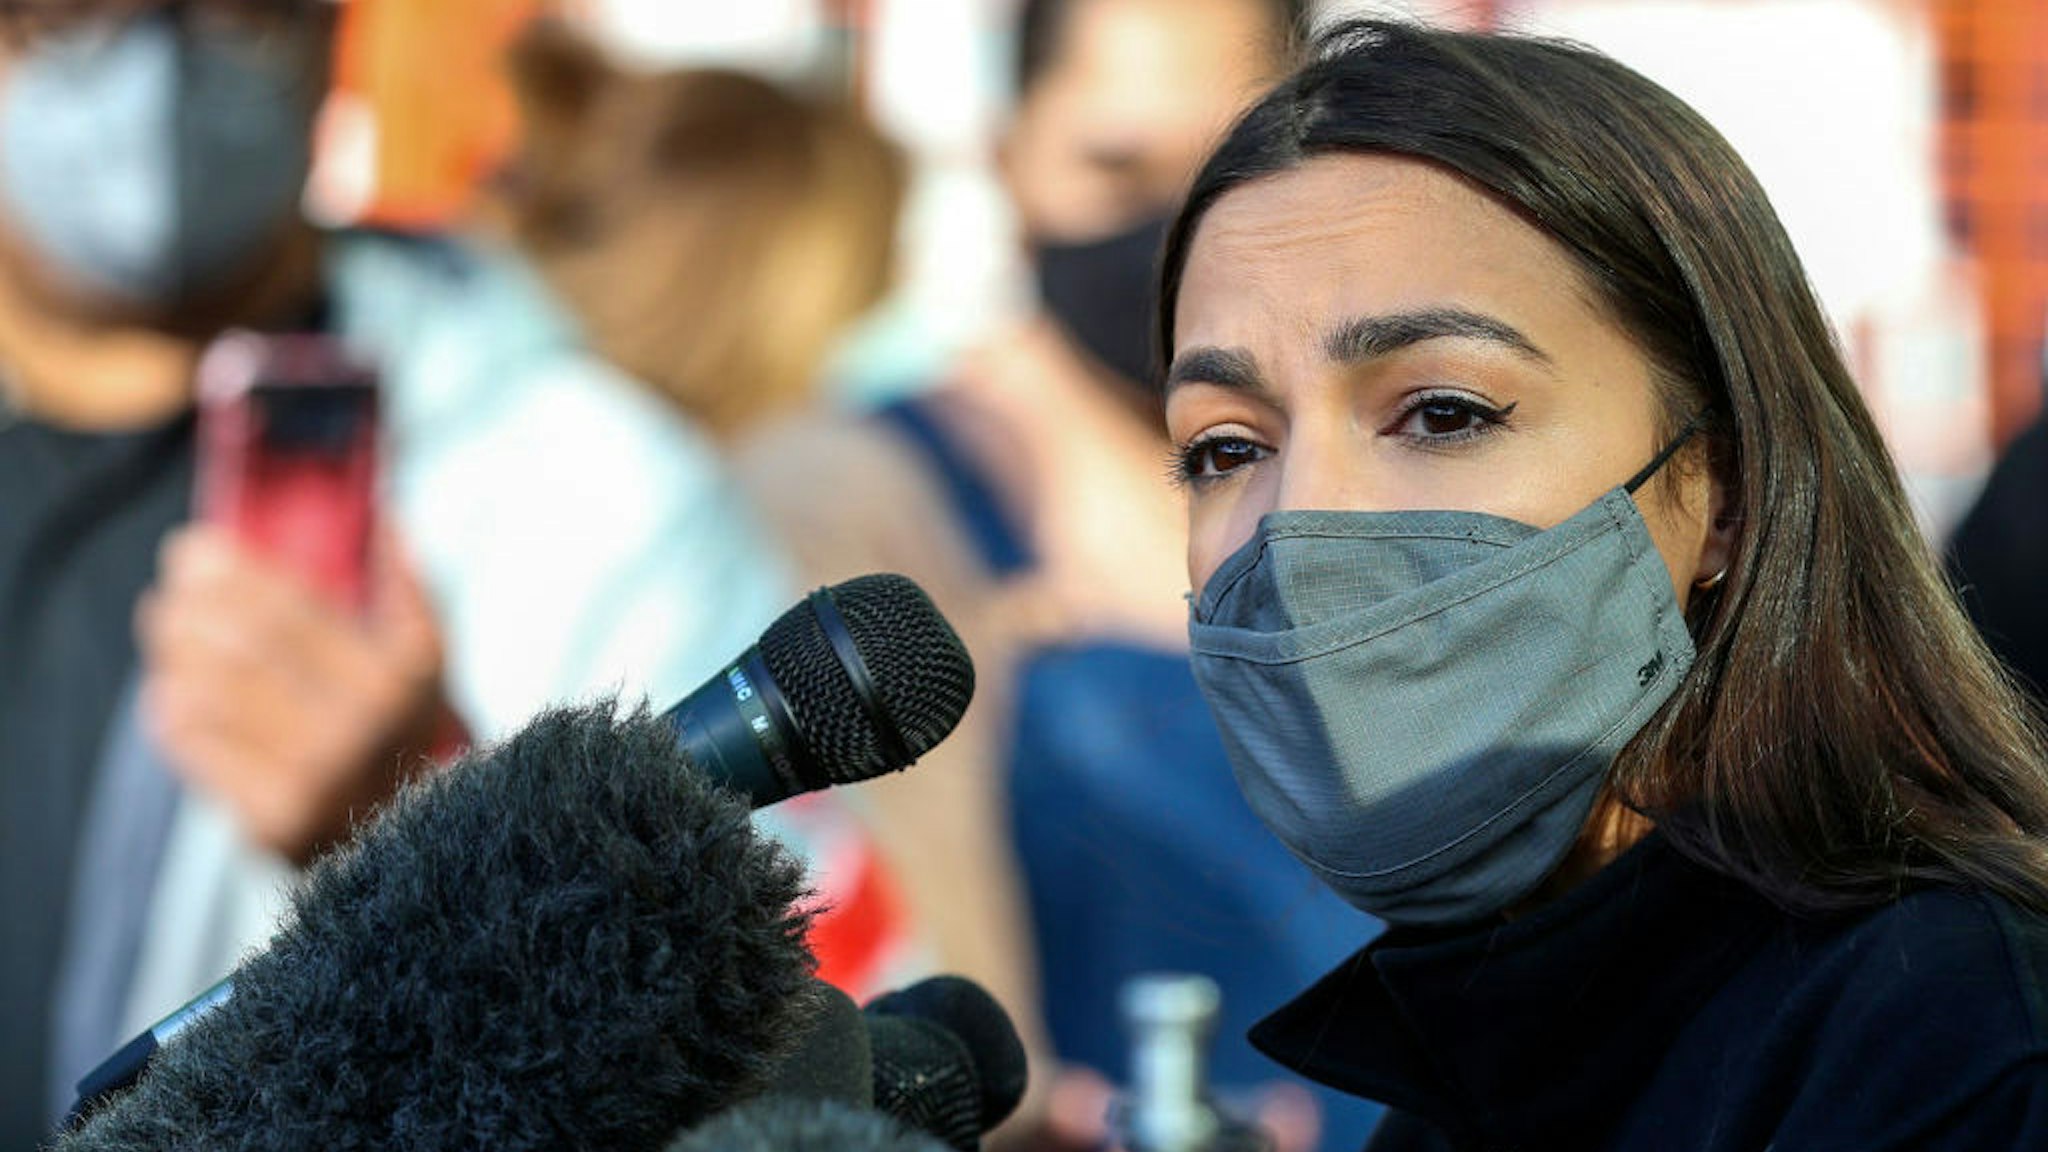 Congresswoman Alexandria Ocasio-Cortez speaks to the media at the Houston Food Bank on February 20, 2021 in Houston, Texas. - The lawmakers address the weather disaster in Texas and helped distribute food at the food bank. (Photo by Thomas Shea / AFP) (Photo by THOMAS SHEA/AFP via Getty Images)